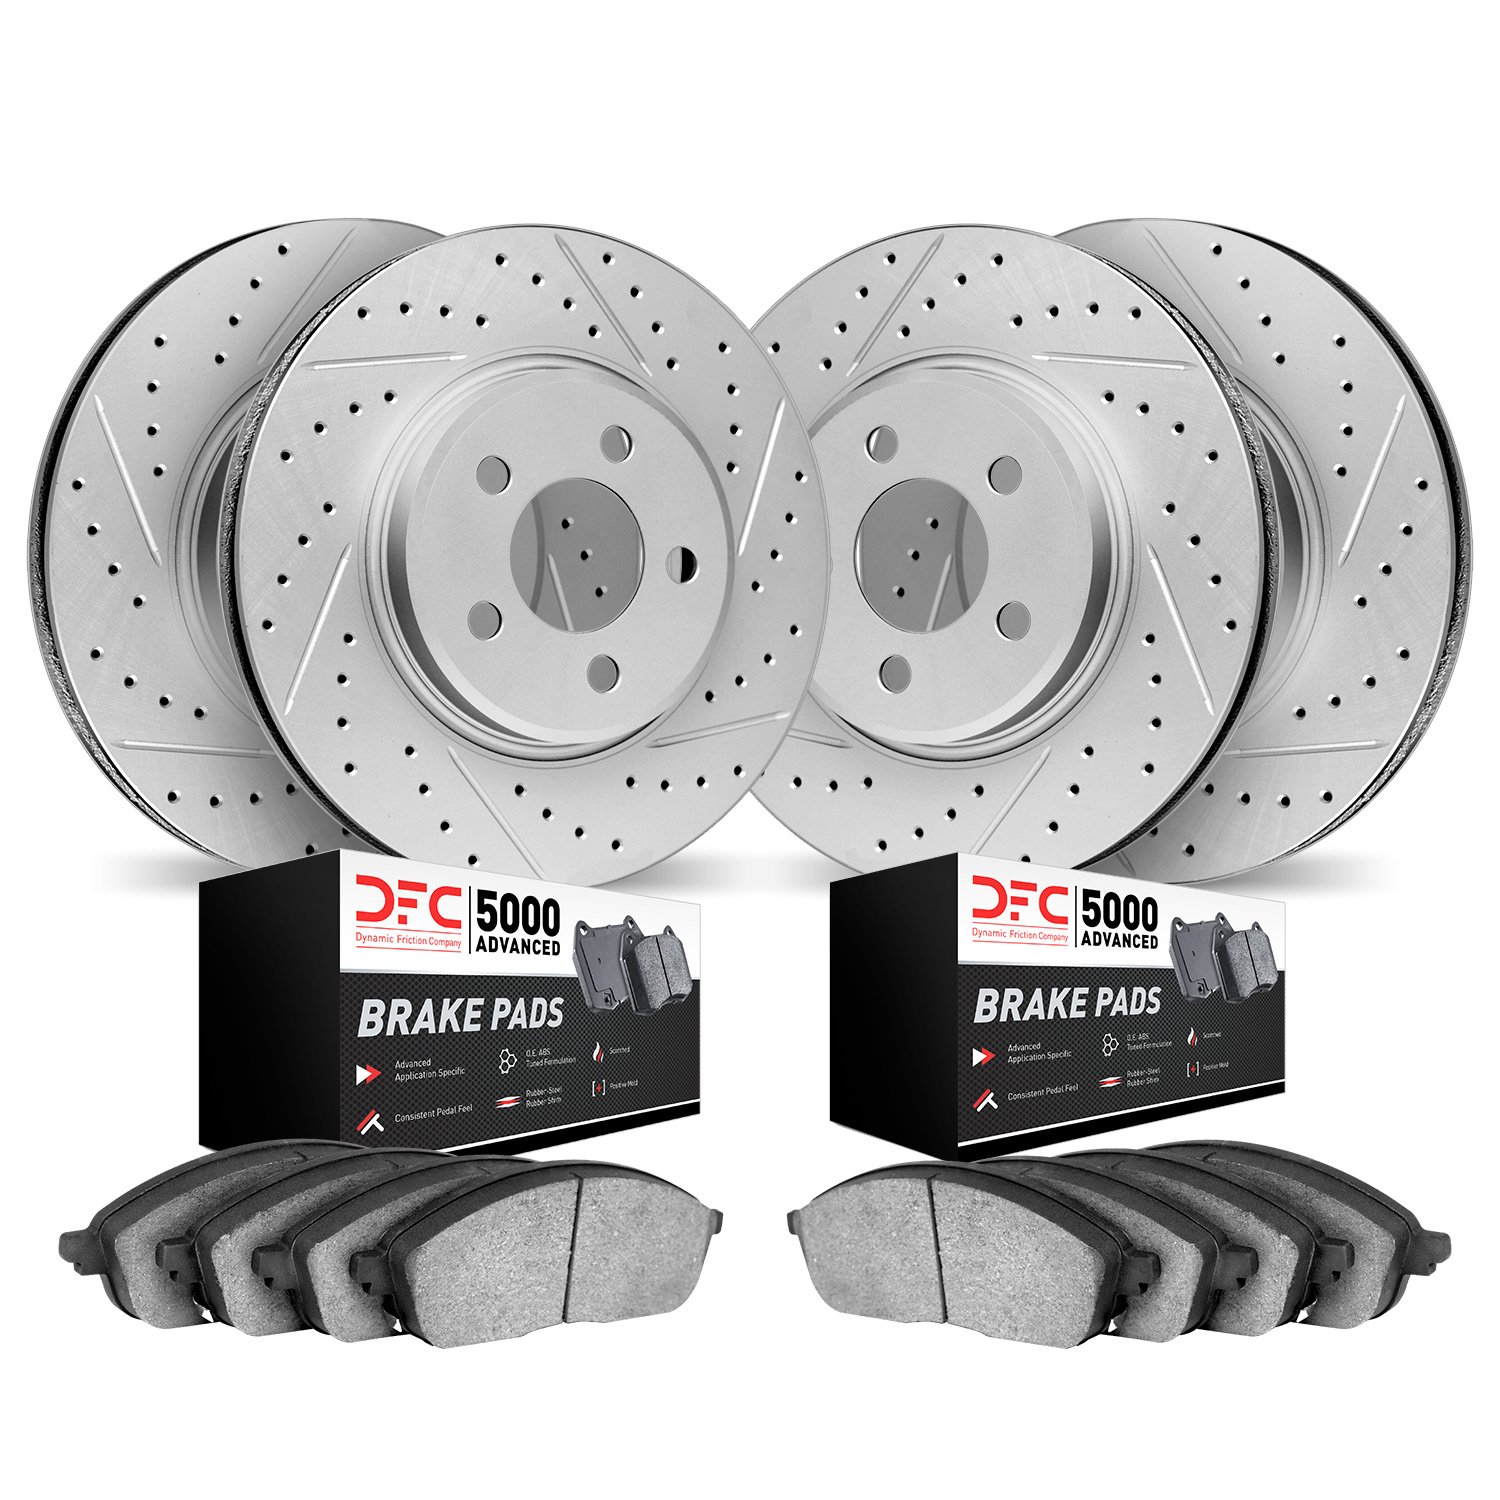 2504-46013 Geoperformance Drilled/Slotted Rotors w/5000 Advanced Brake Pads Kit, 2009-2011 GM, Position: Front and Rear